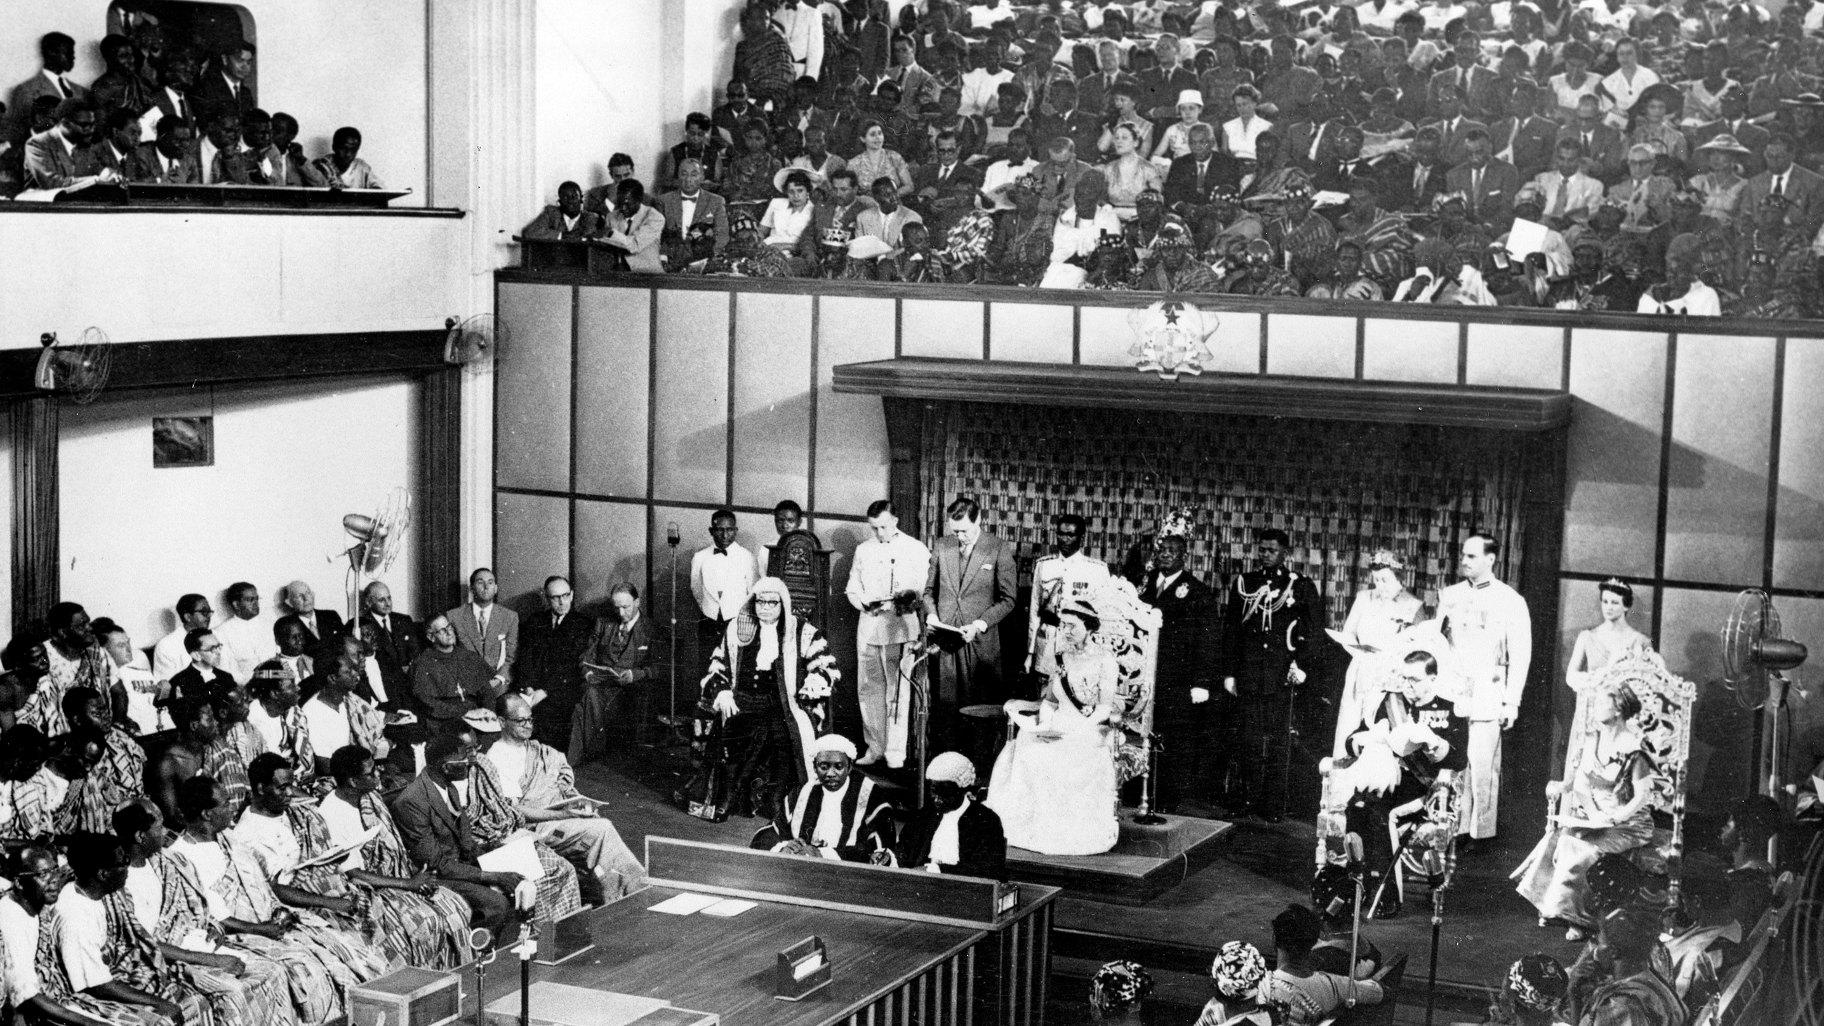 The Duchess of Kent, seated center on dais, reads a message from the Queen of England in the Parliament House at Accra, Ghana, on March 6, 1957. Ghana, the British colony known as the Gold Coast, is the first Black African nation to gain independence from colonial rule. (AP Photo)